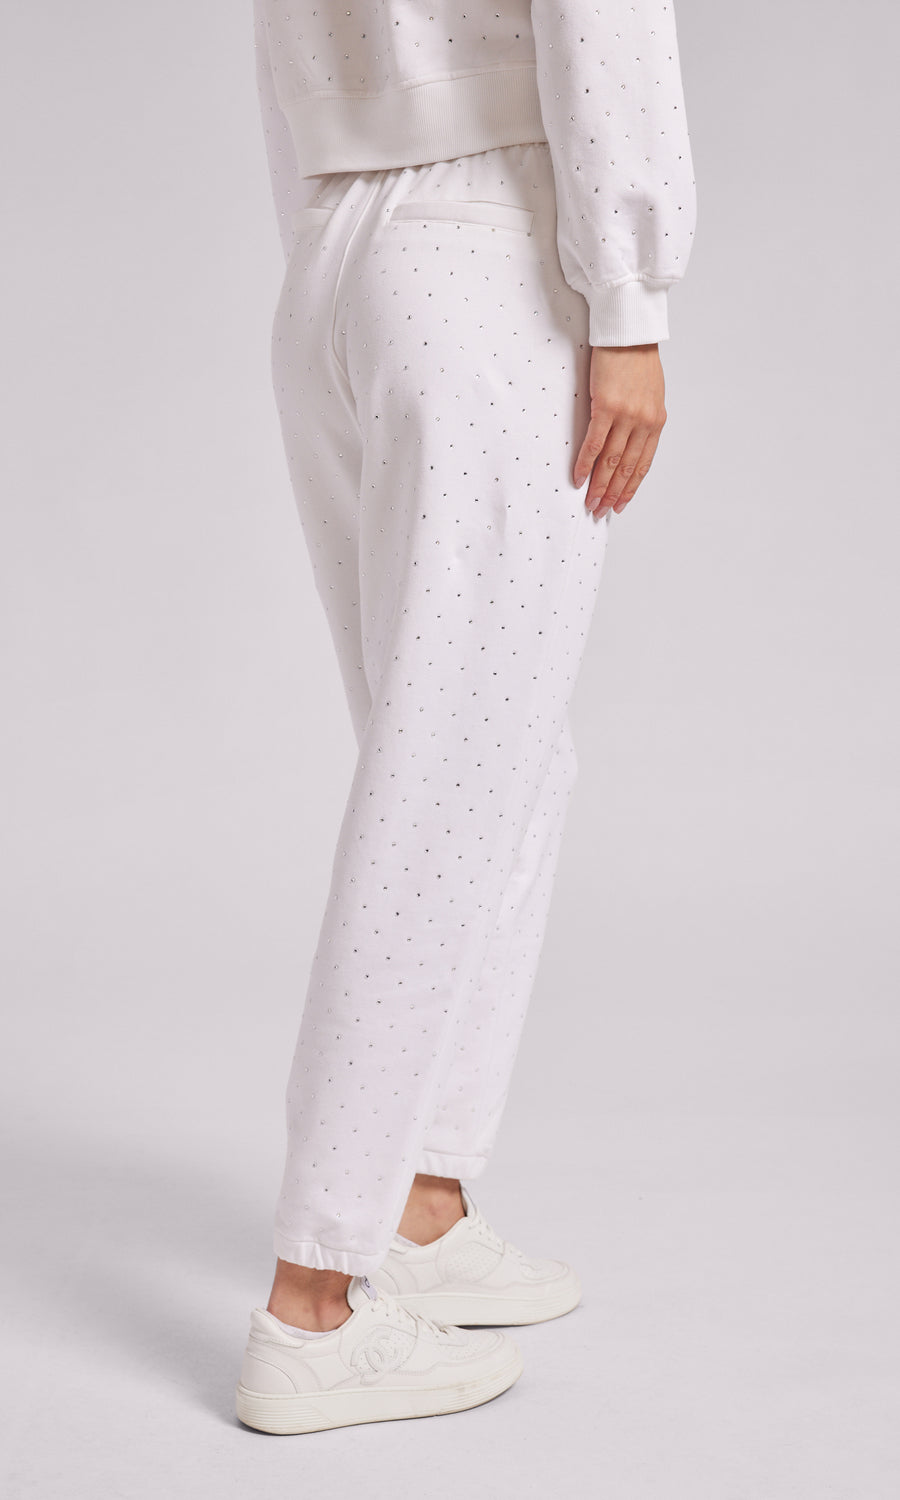 Rena Crystal Sweatpants - White/Clear